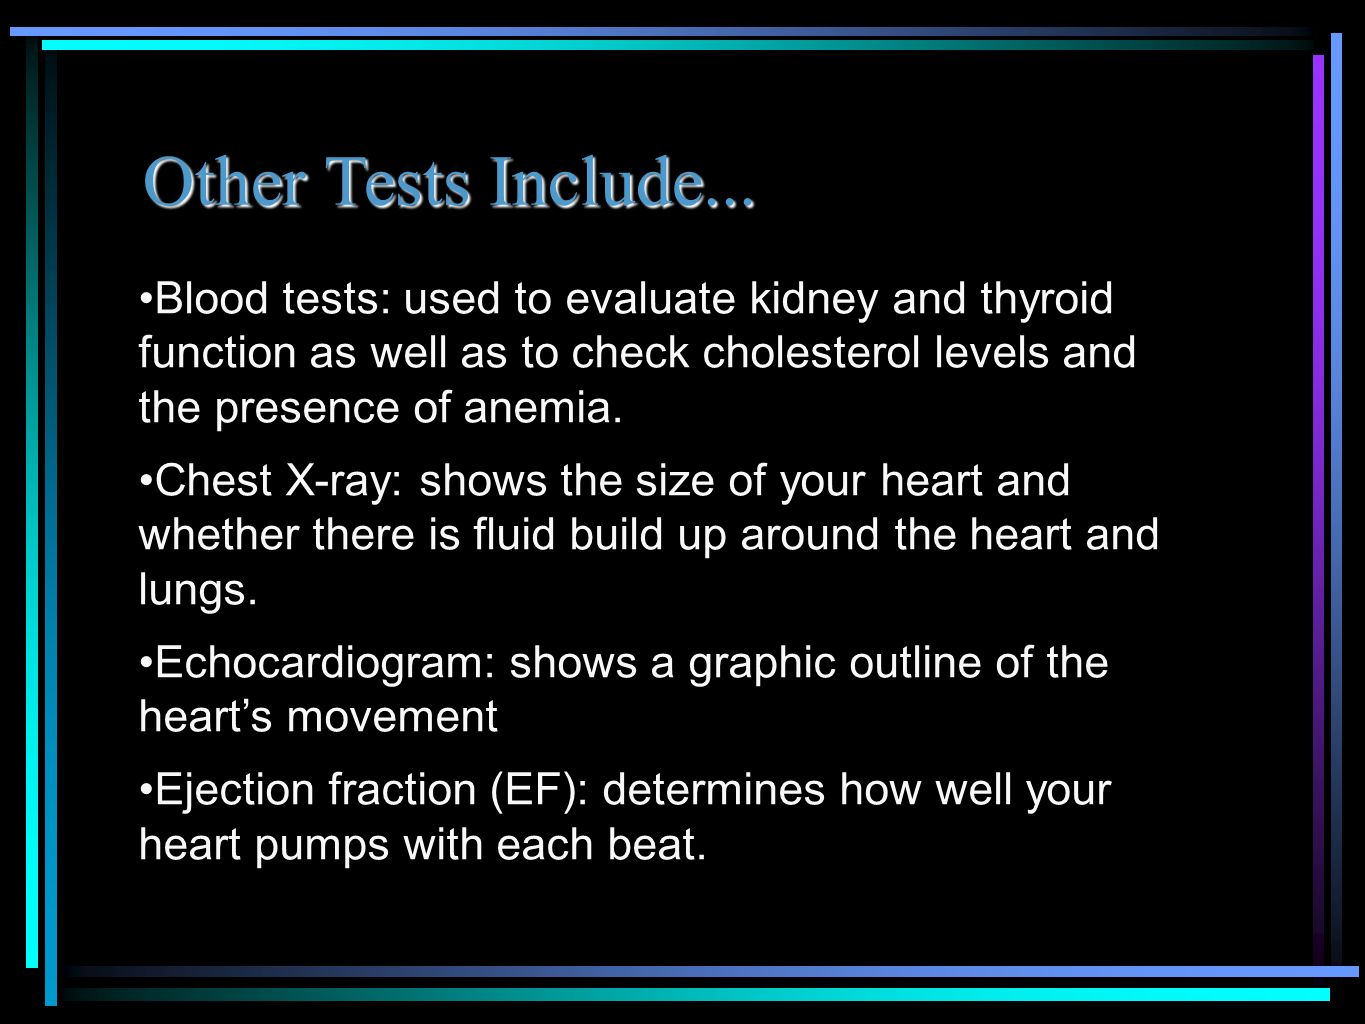 Other Tests Include...